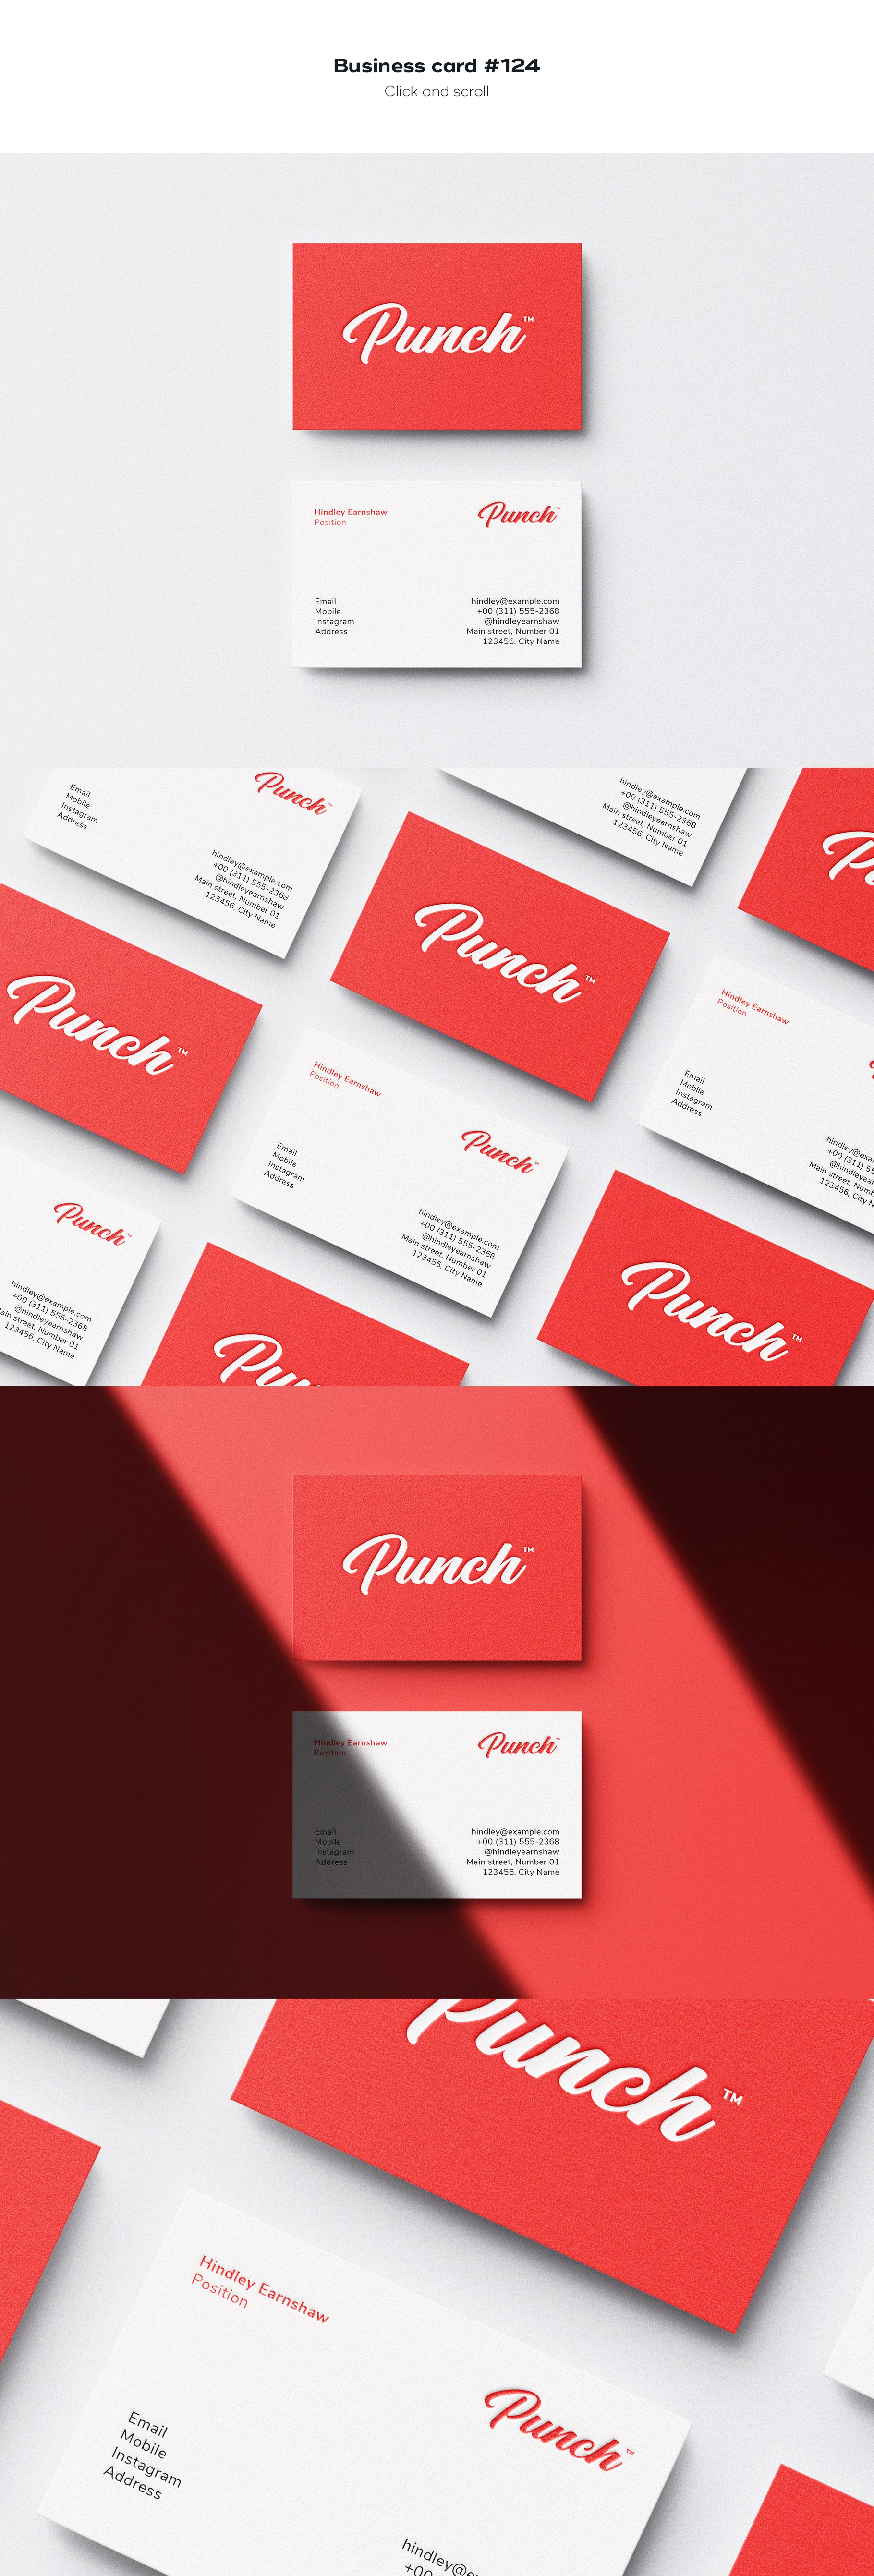 business card 124 234